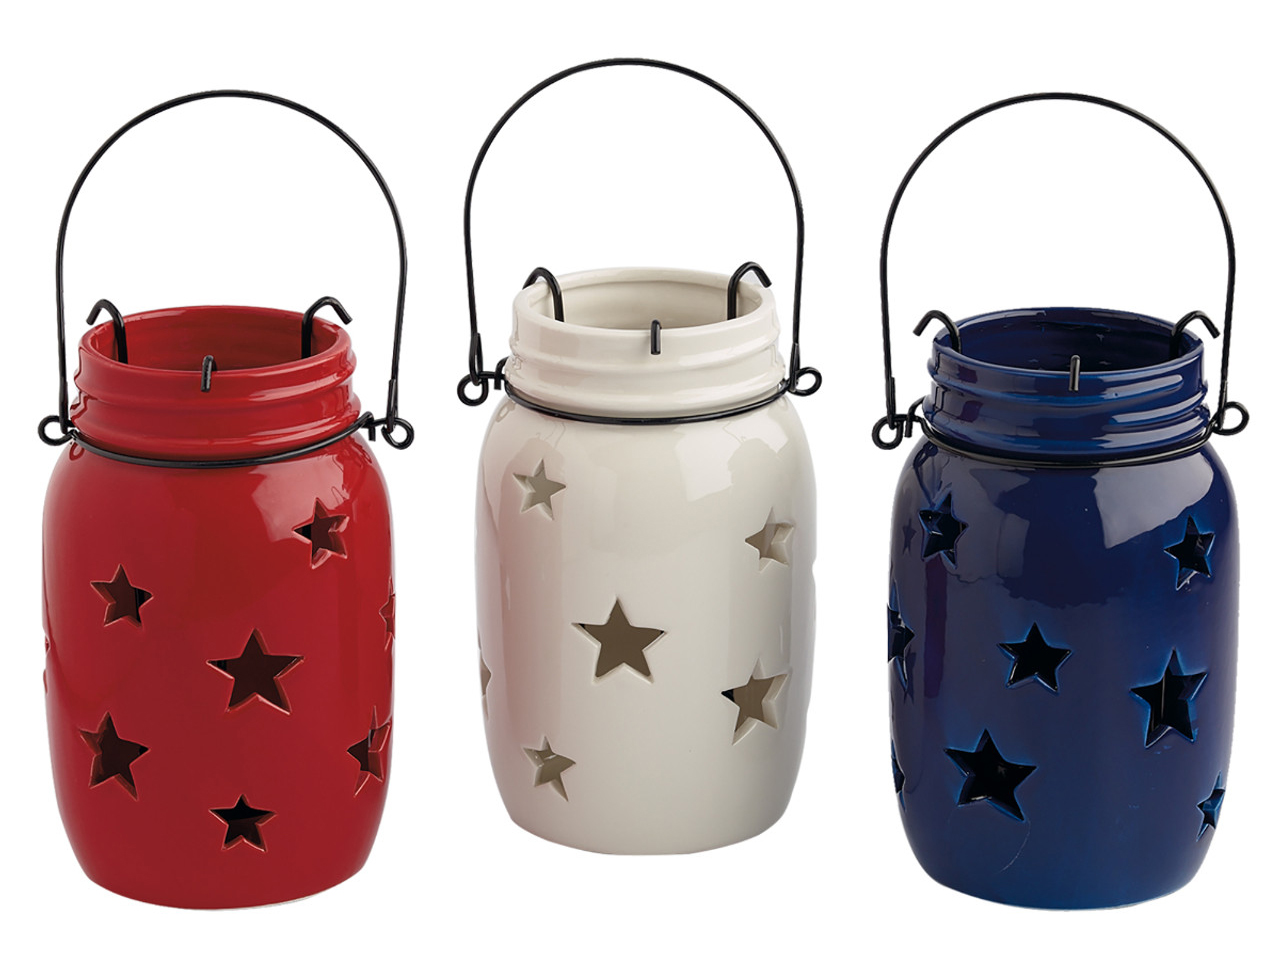 Red white and blue Americana stars jar candle holders